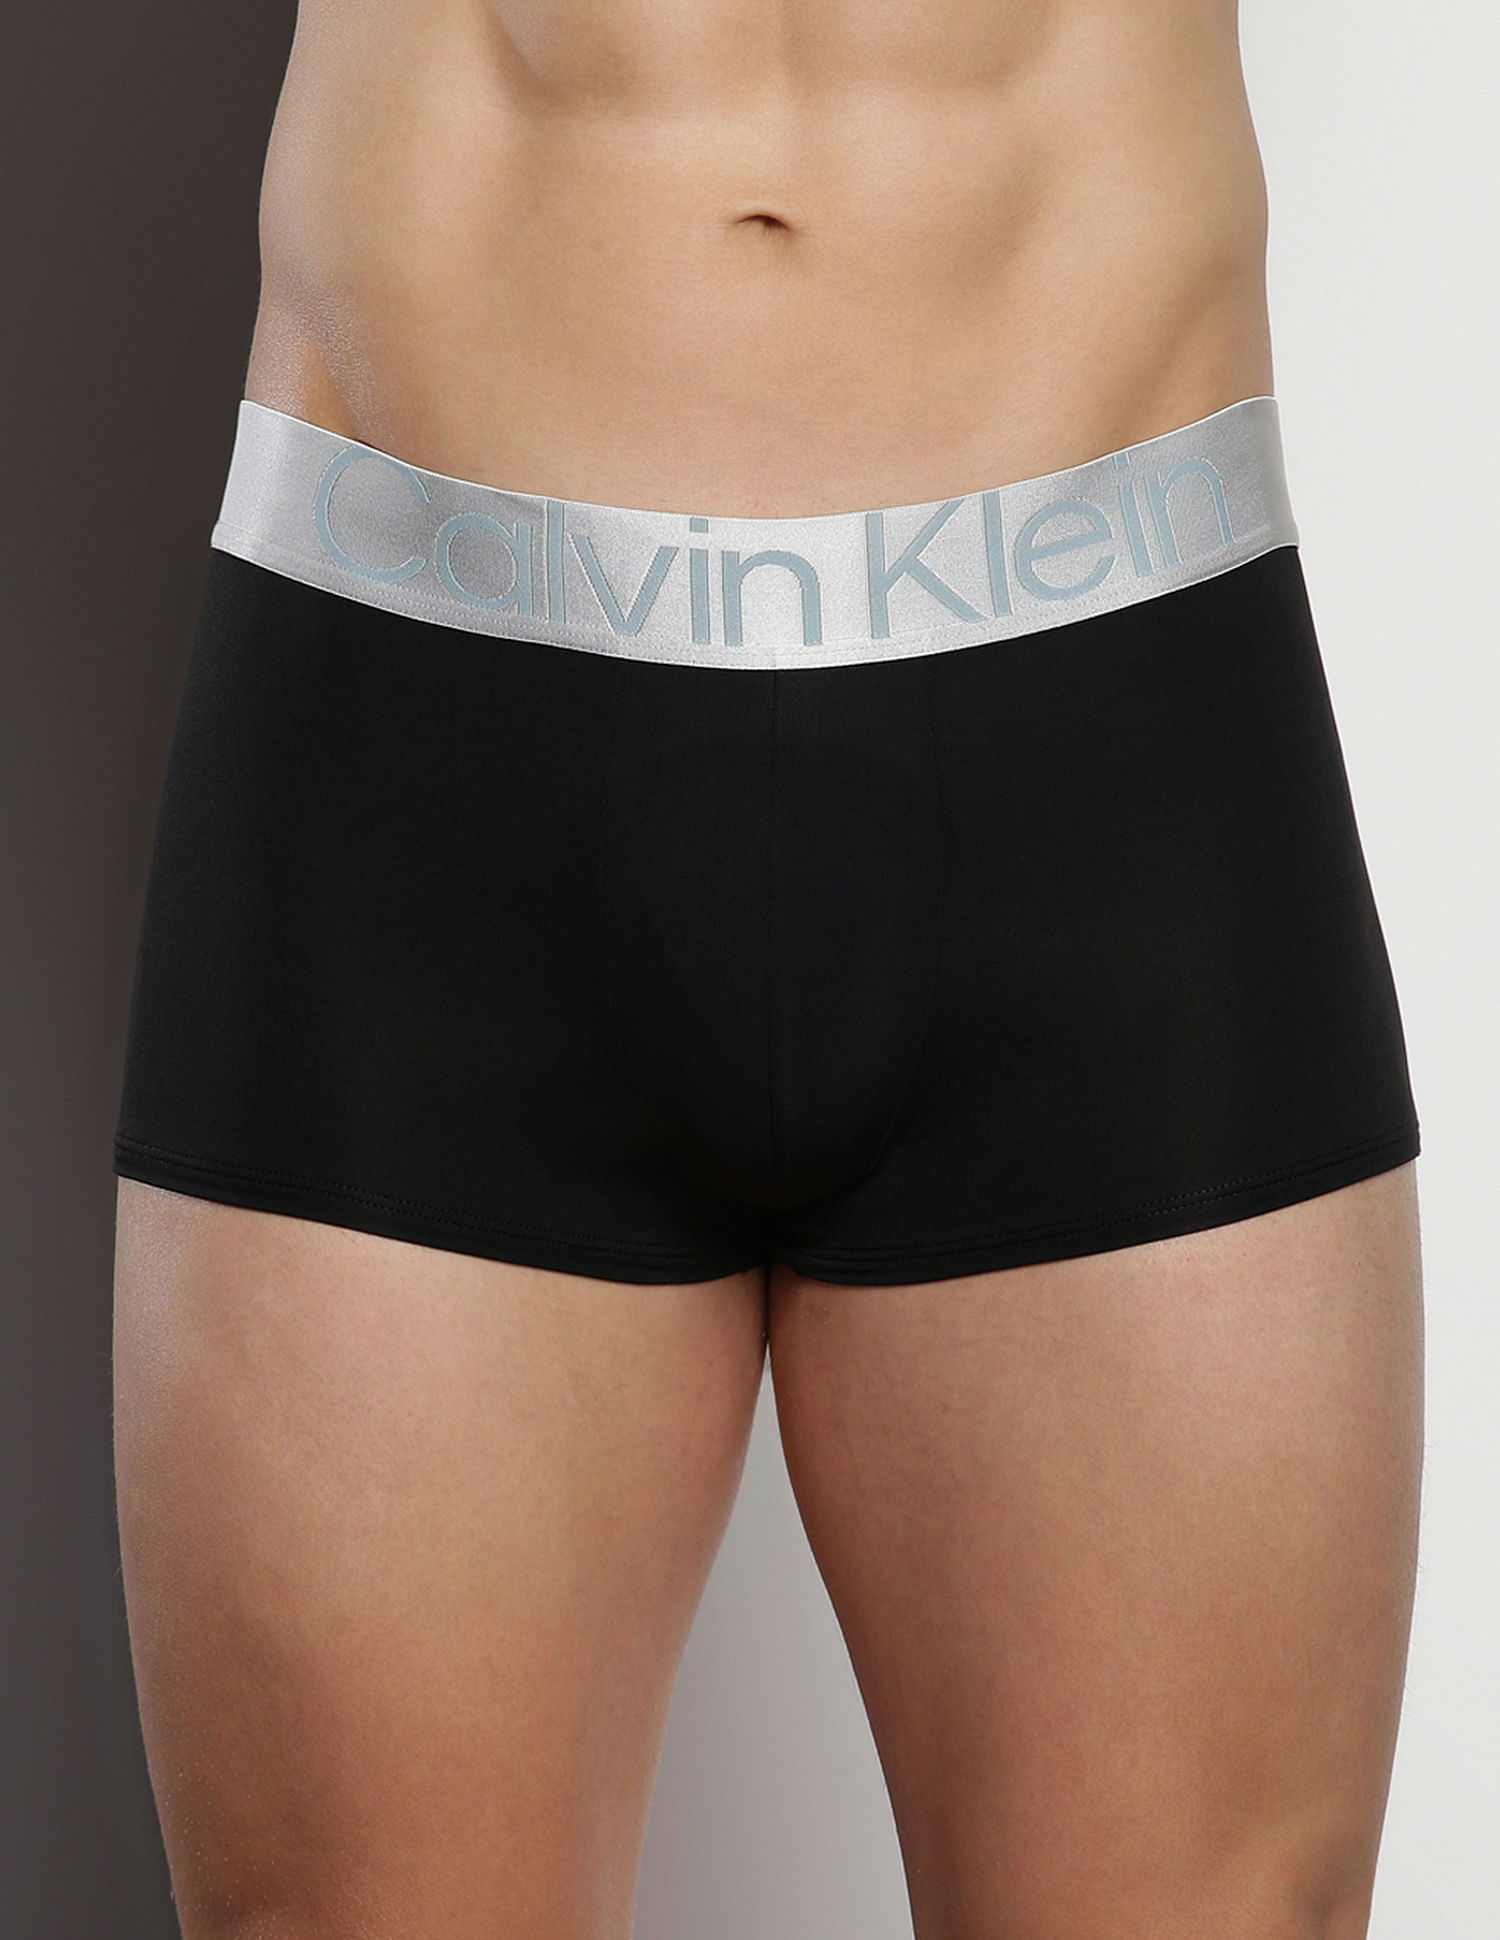 Buy Calvin Klein Underwear Low Rise Solid Trunks - Pack Of 3 - NNNOW.com